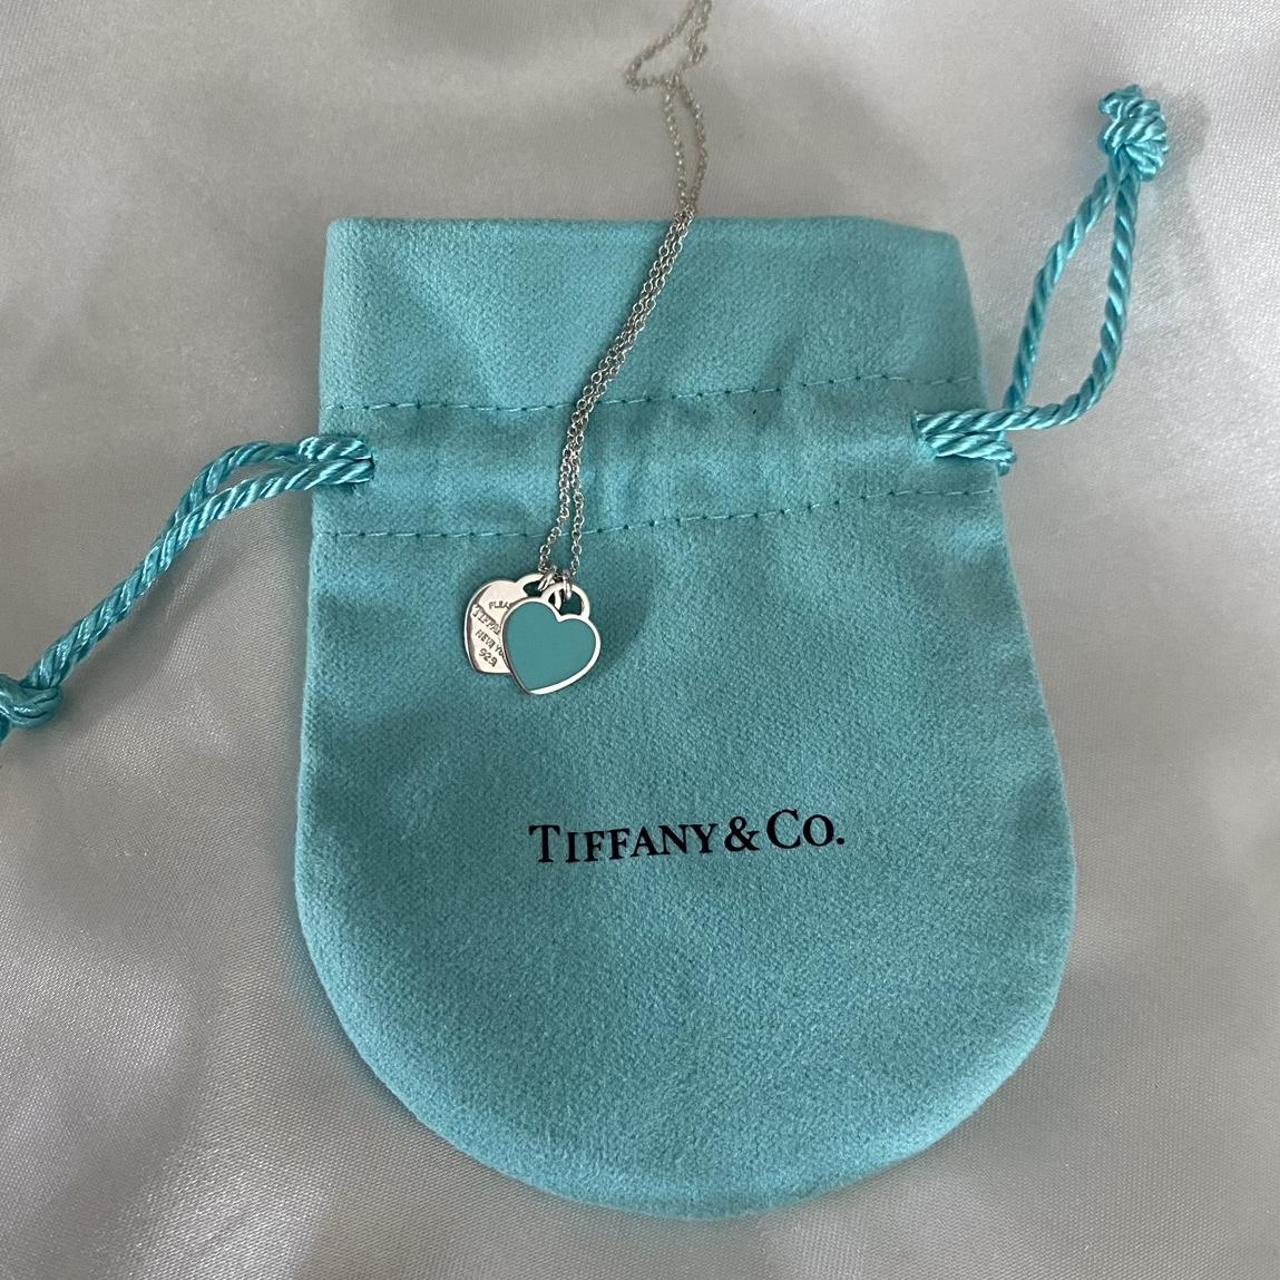 Return to Tiffany Double Heart Tag Pendant Necklace... - Depop